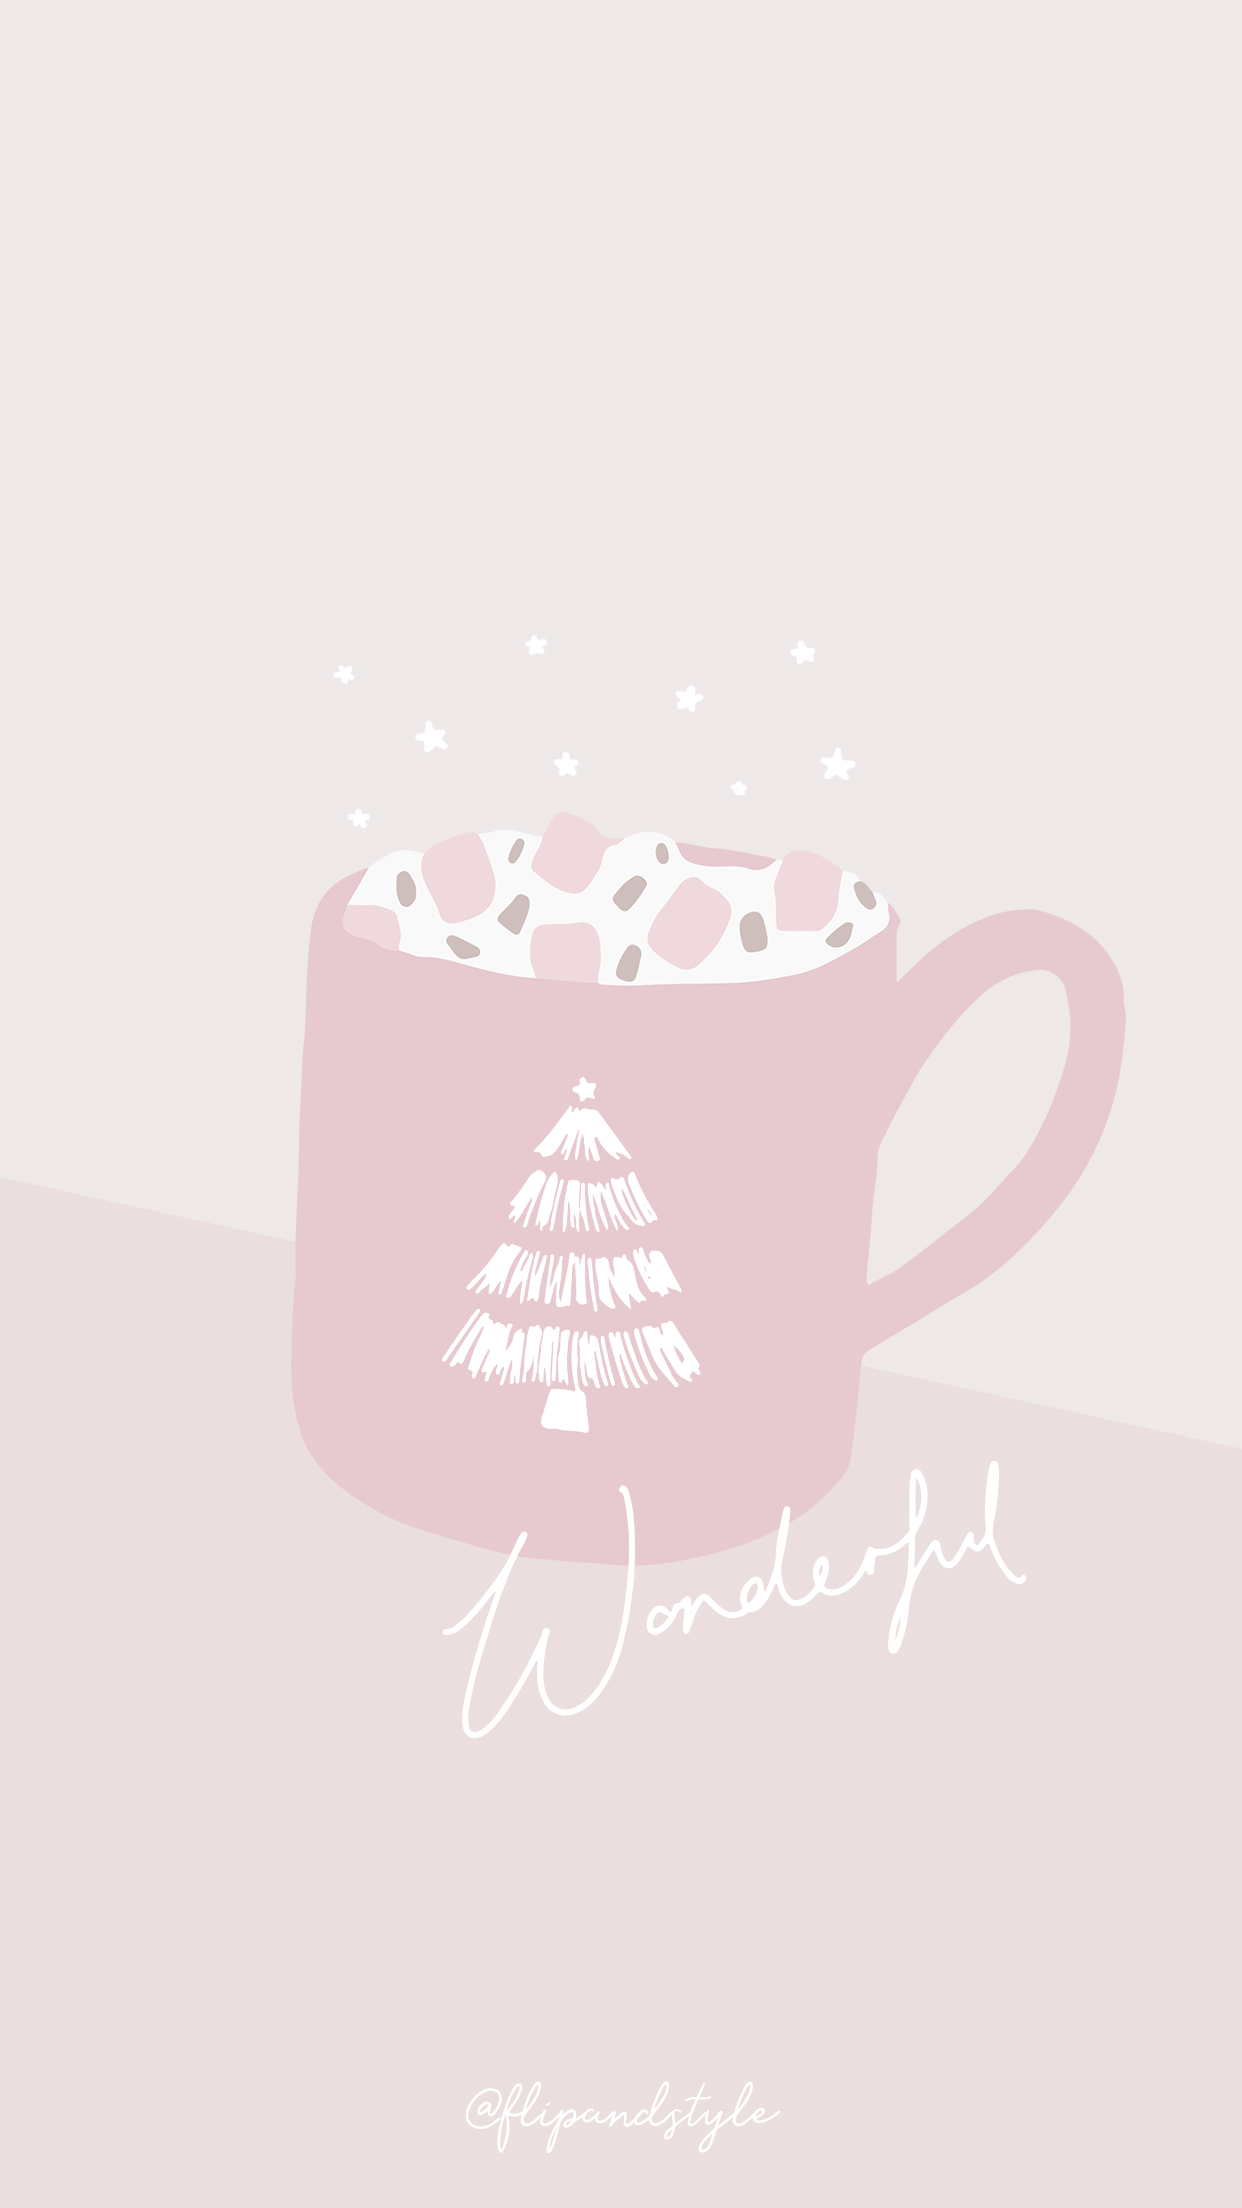 Cute Pink Christmas Wallpaper Free Cute Pink Christmas Background